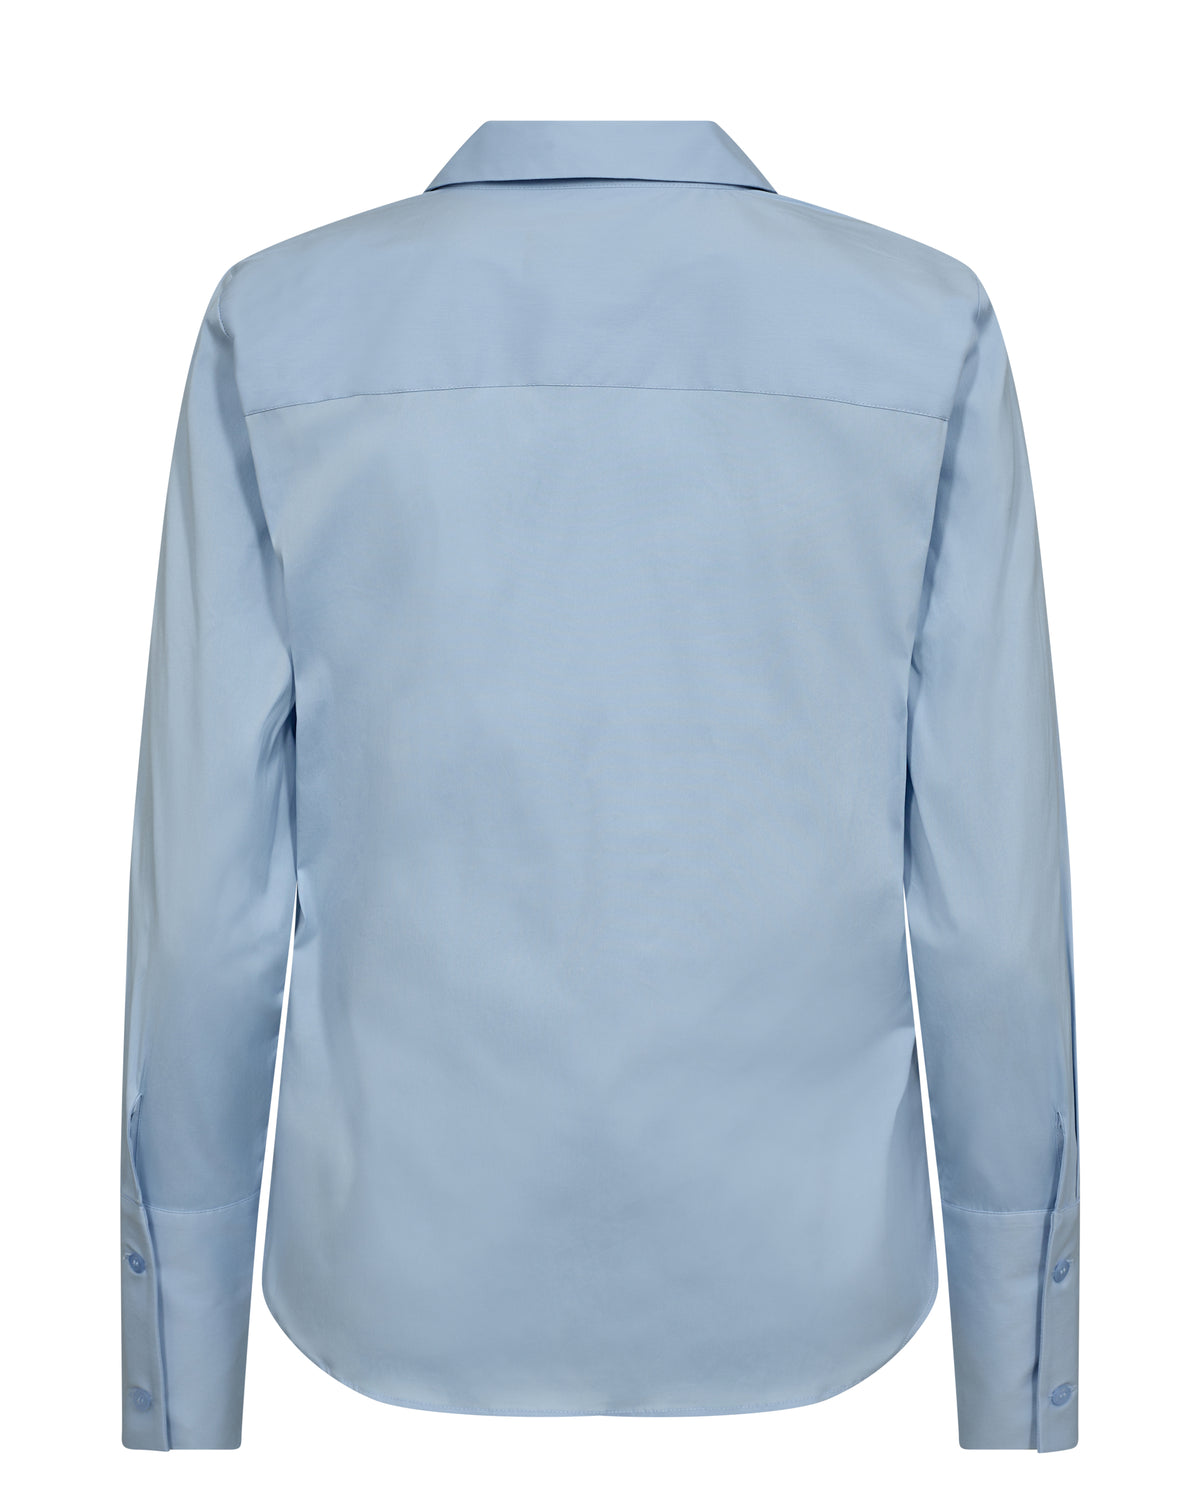 Cornflower blue shirt with classic collar long sleeves and a ruffle along the full length placket